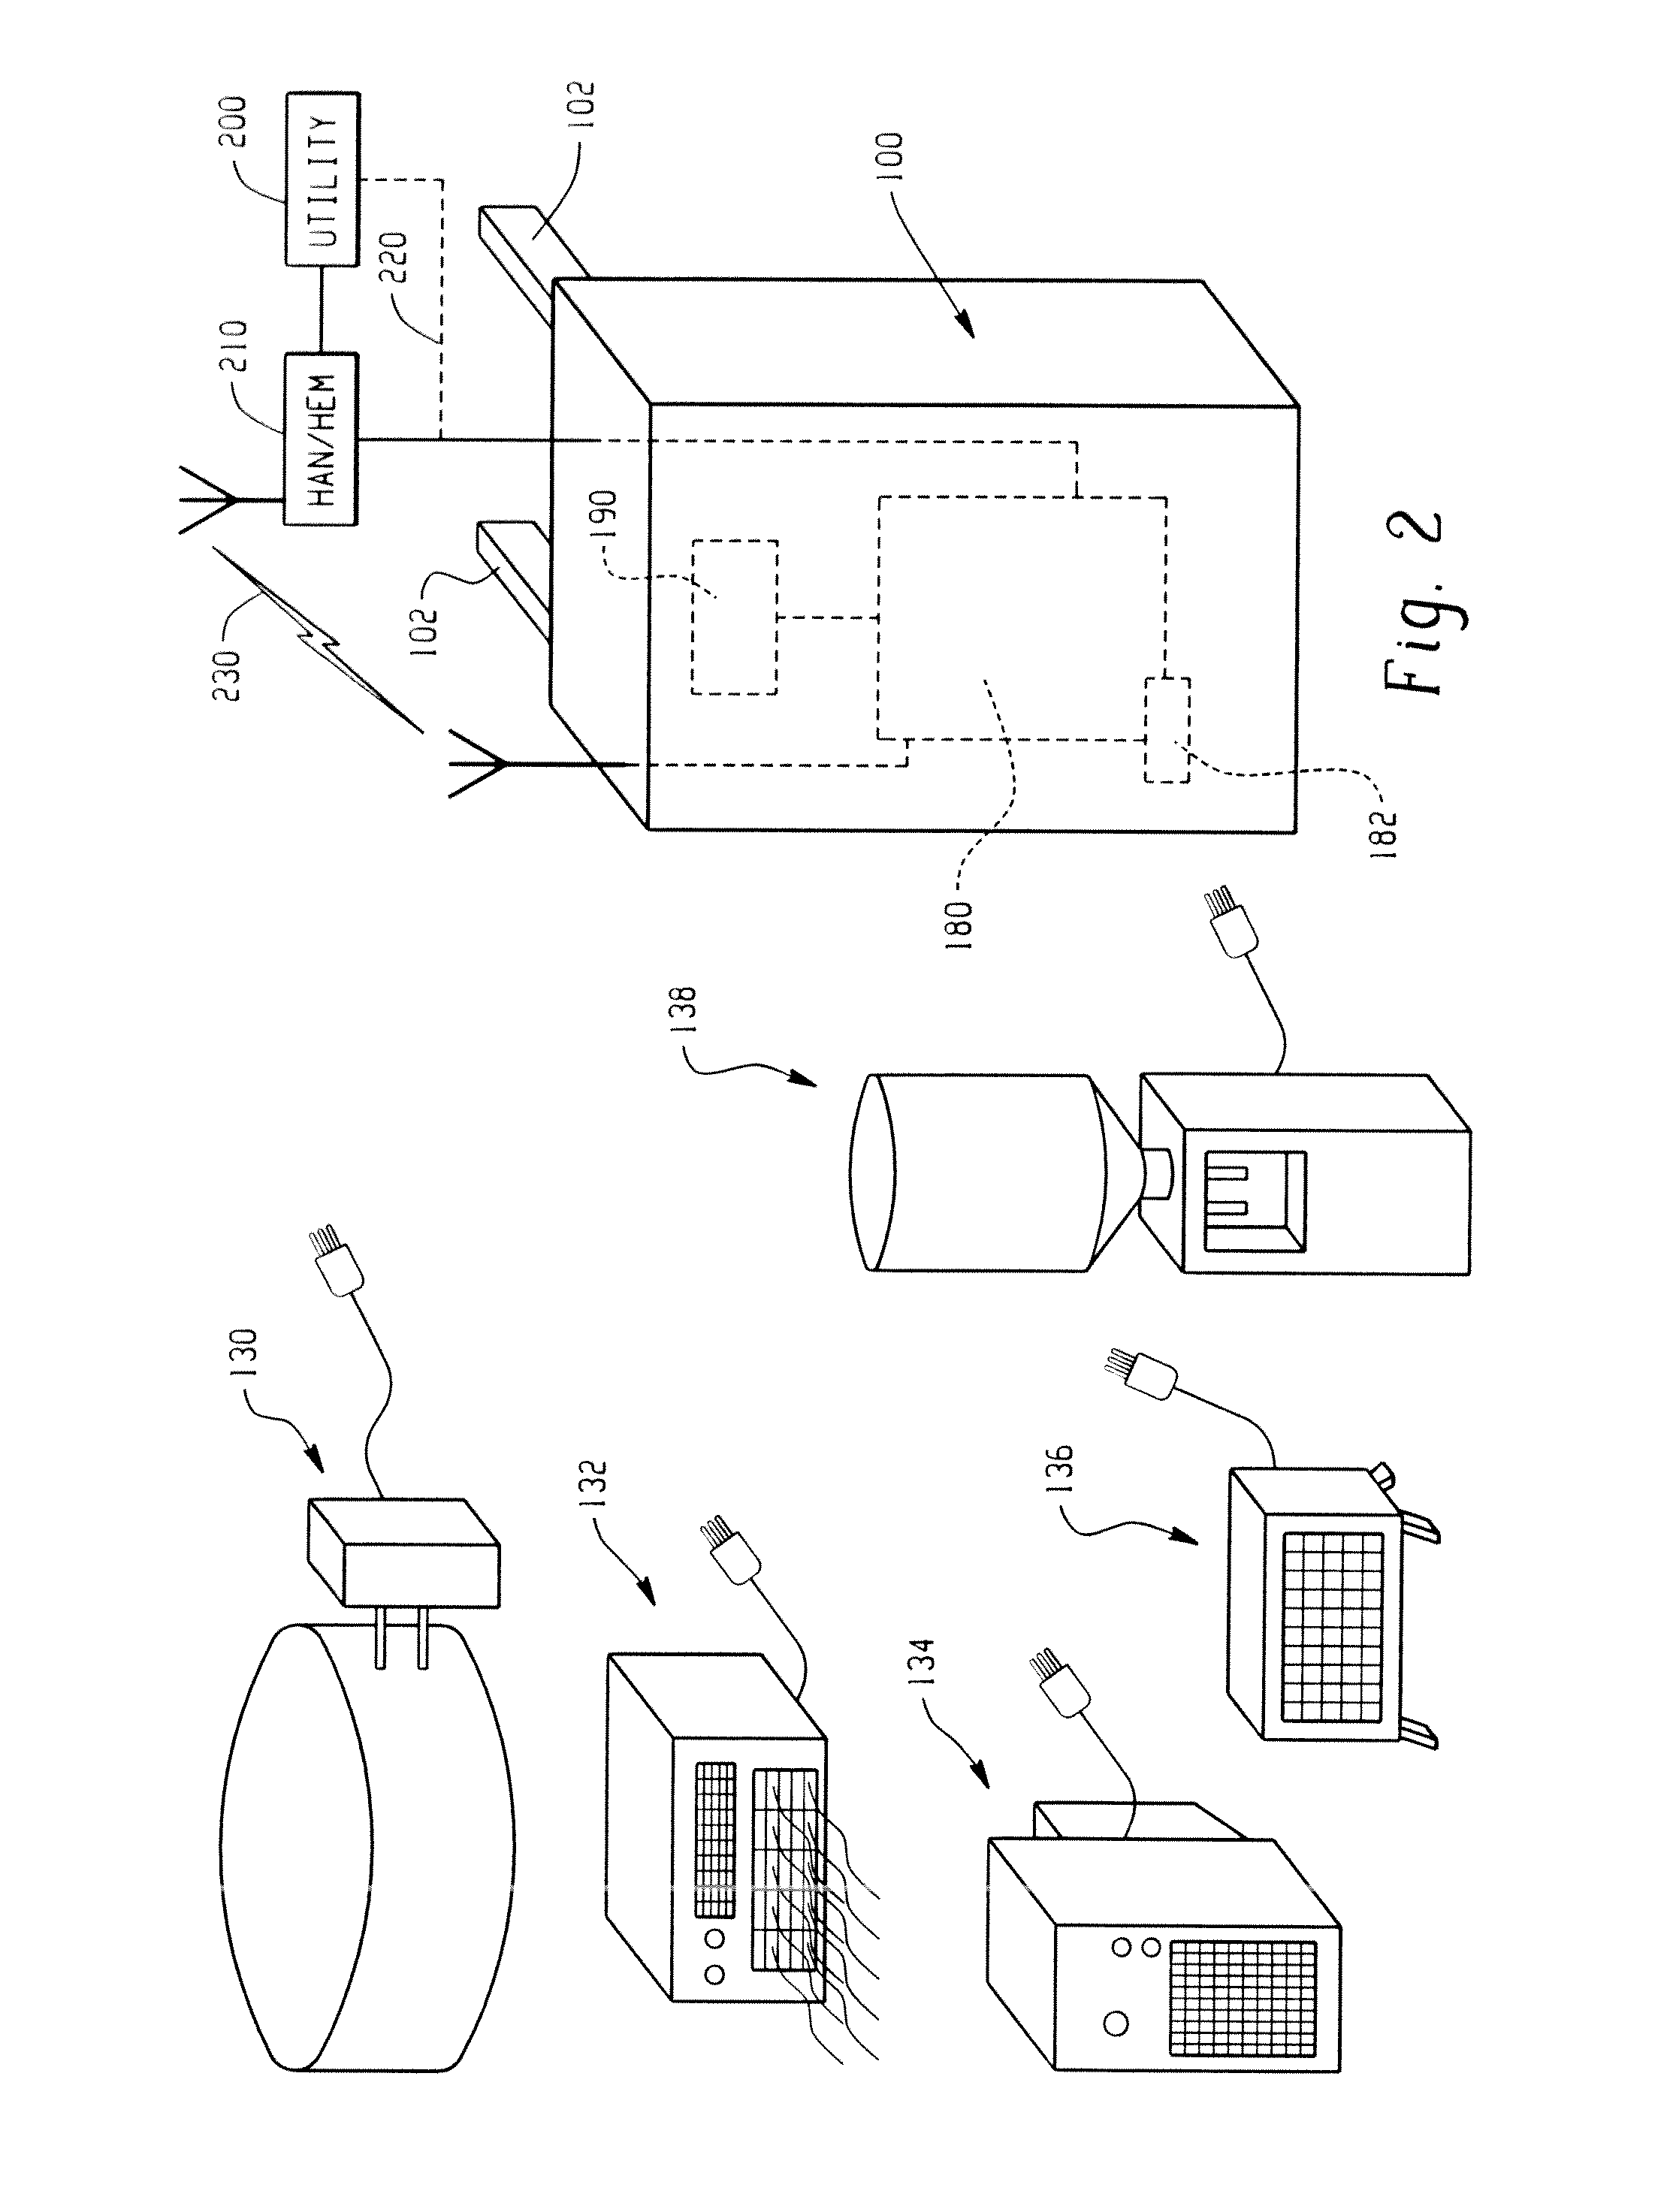 Smart plug with internal condition-based demand response capability